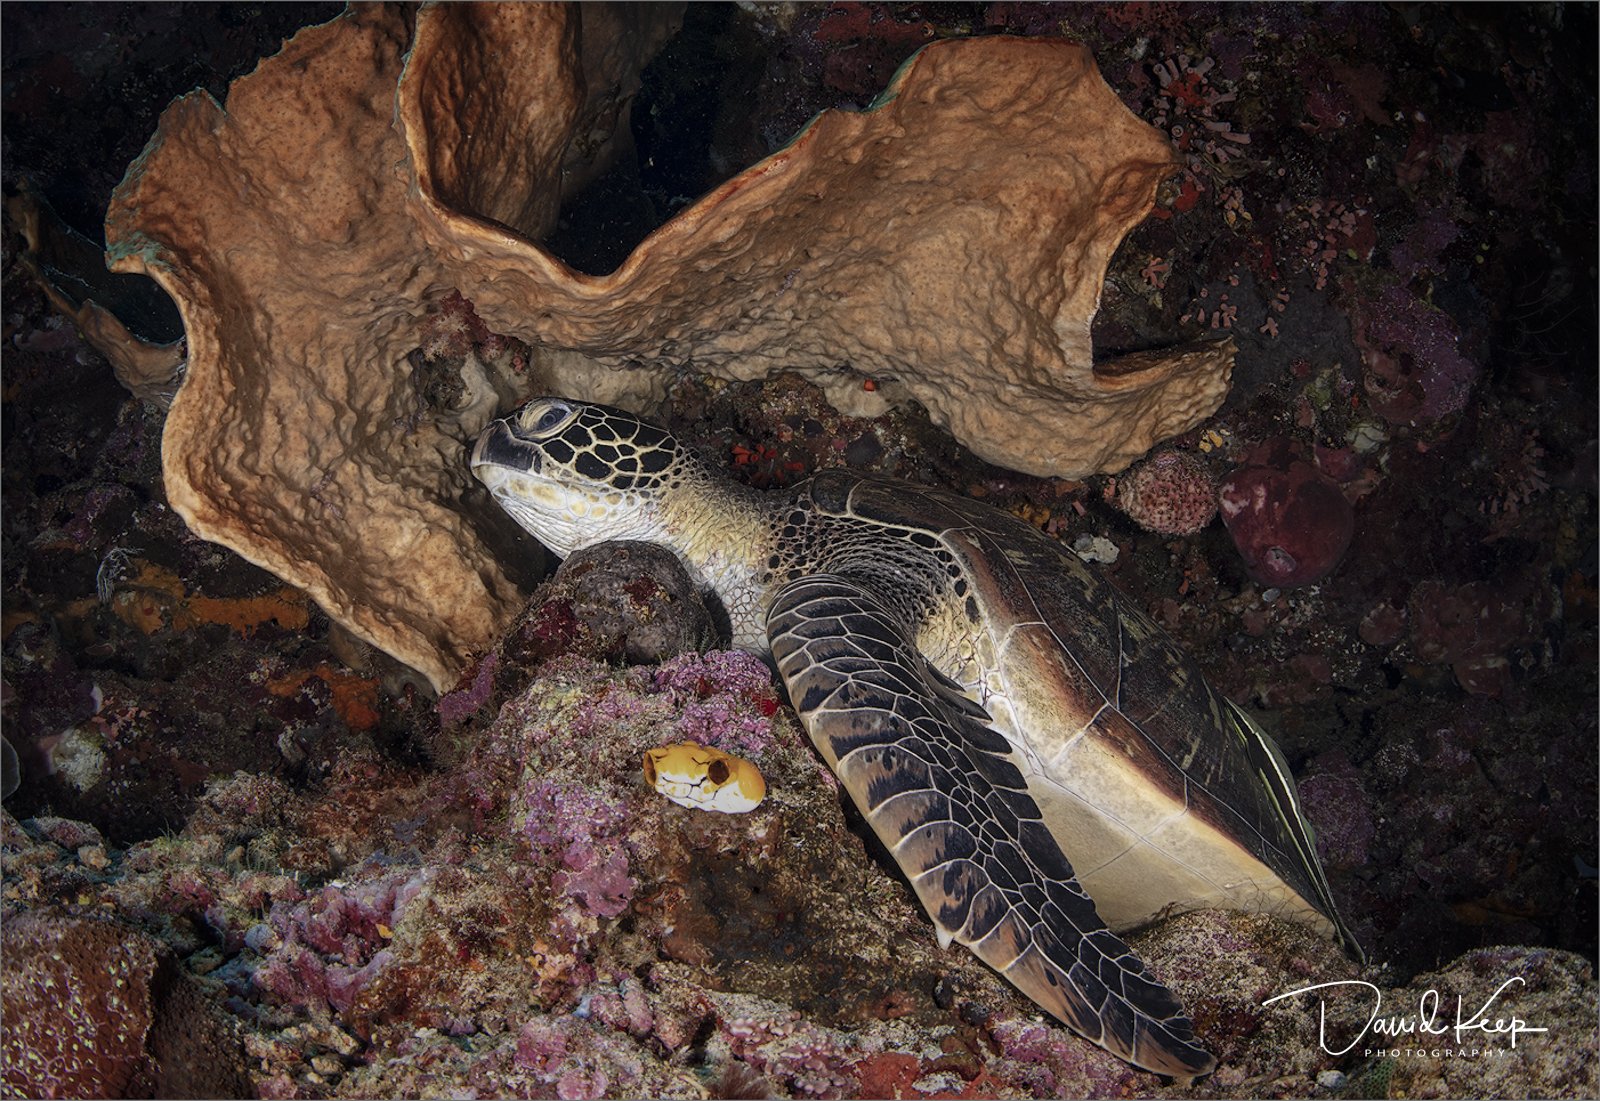 Green Turtle sheltering from current behind soft coral.